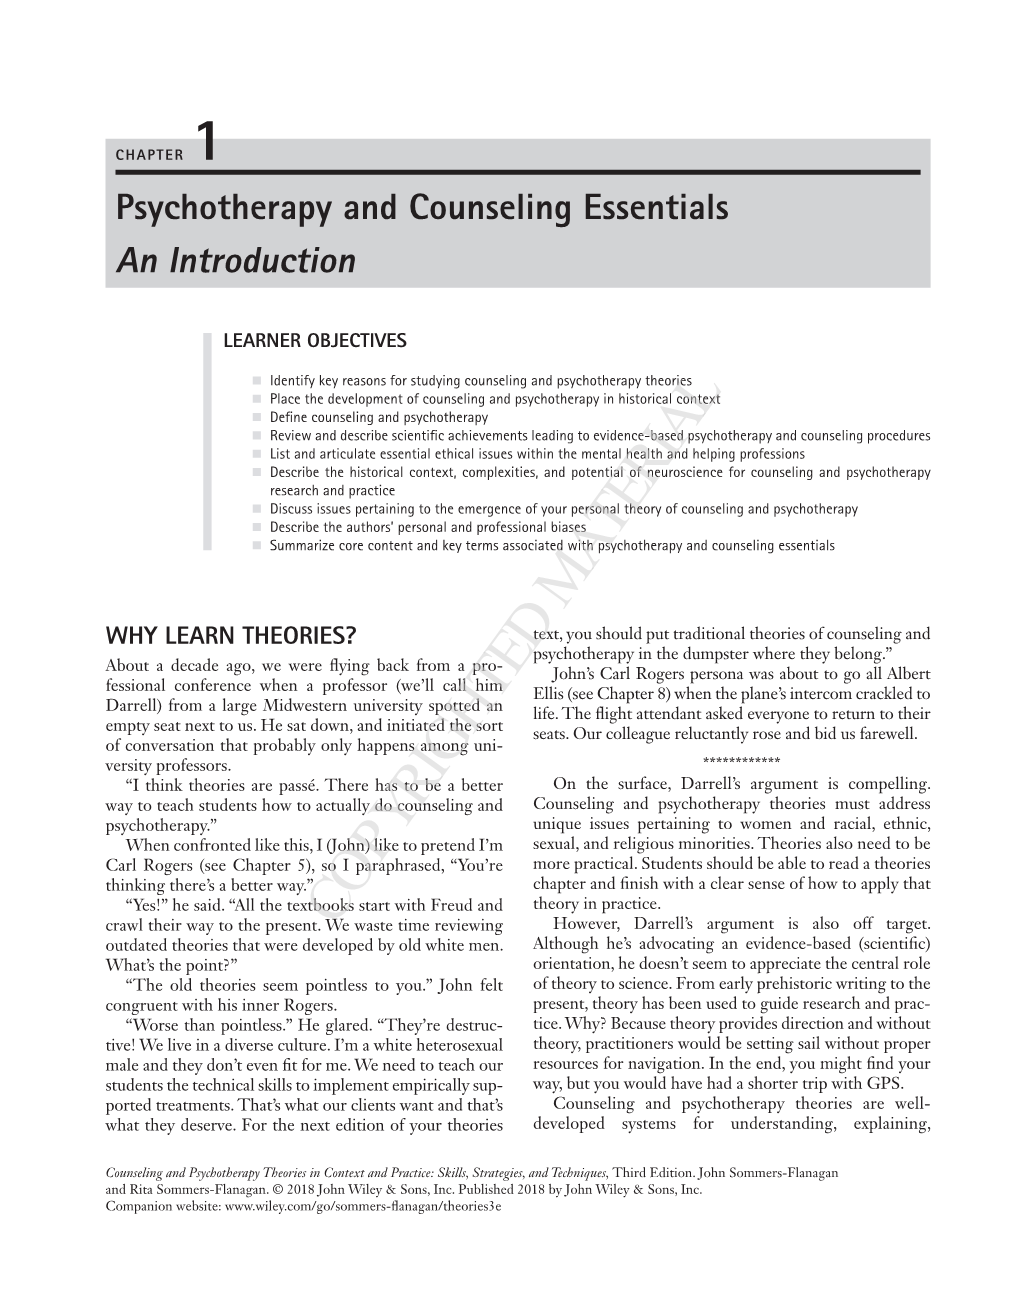 Definitions of Counseling and Psychotherapy